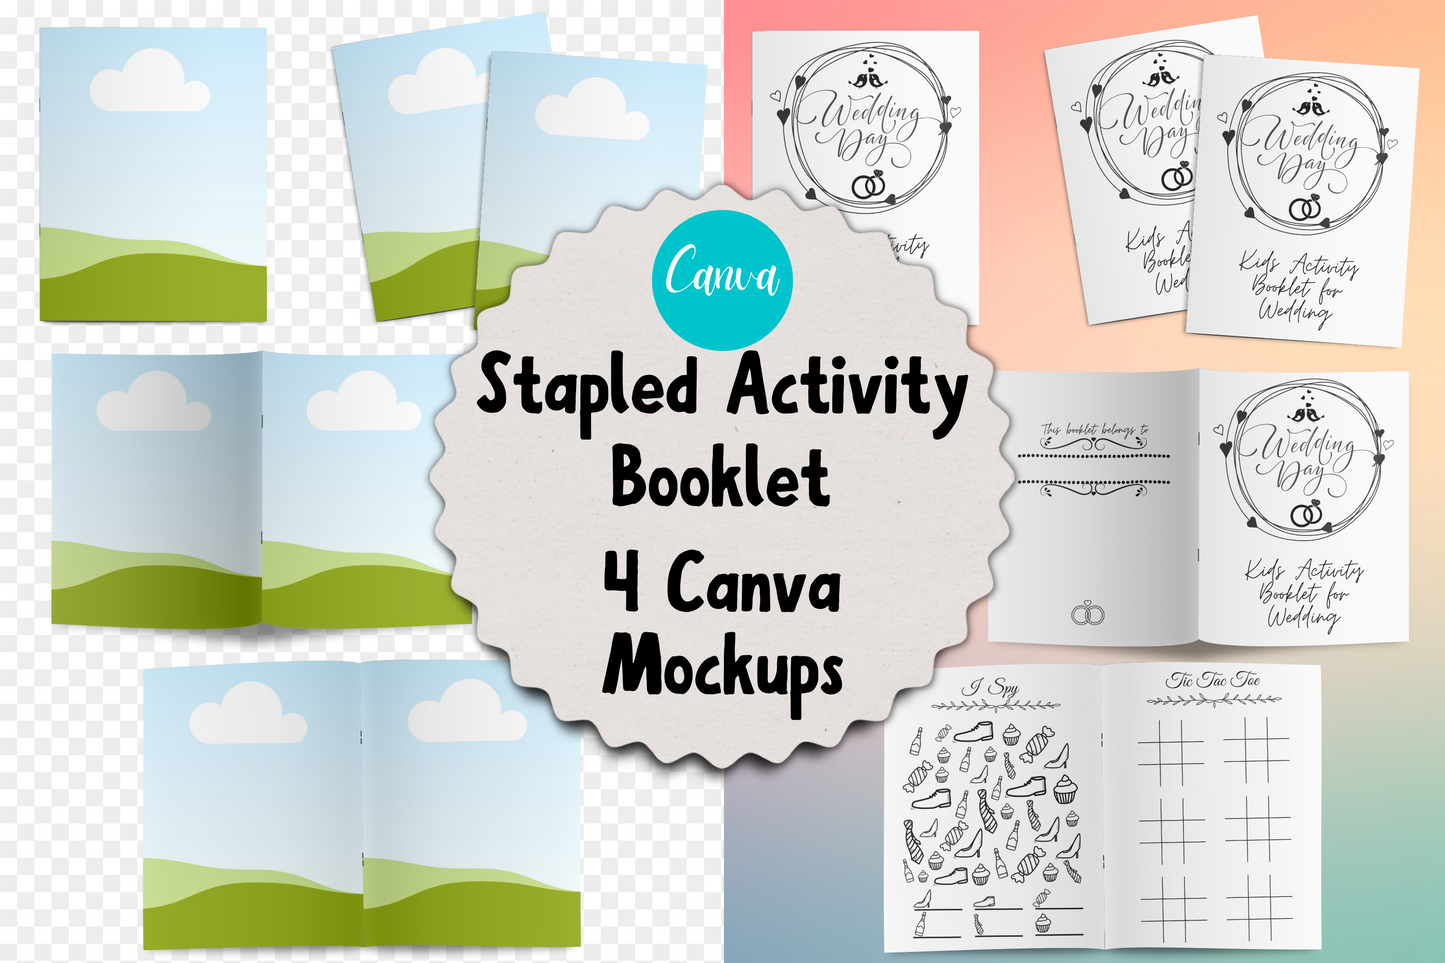 Stapled Activity Booklet Canva Mockups